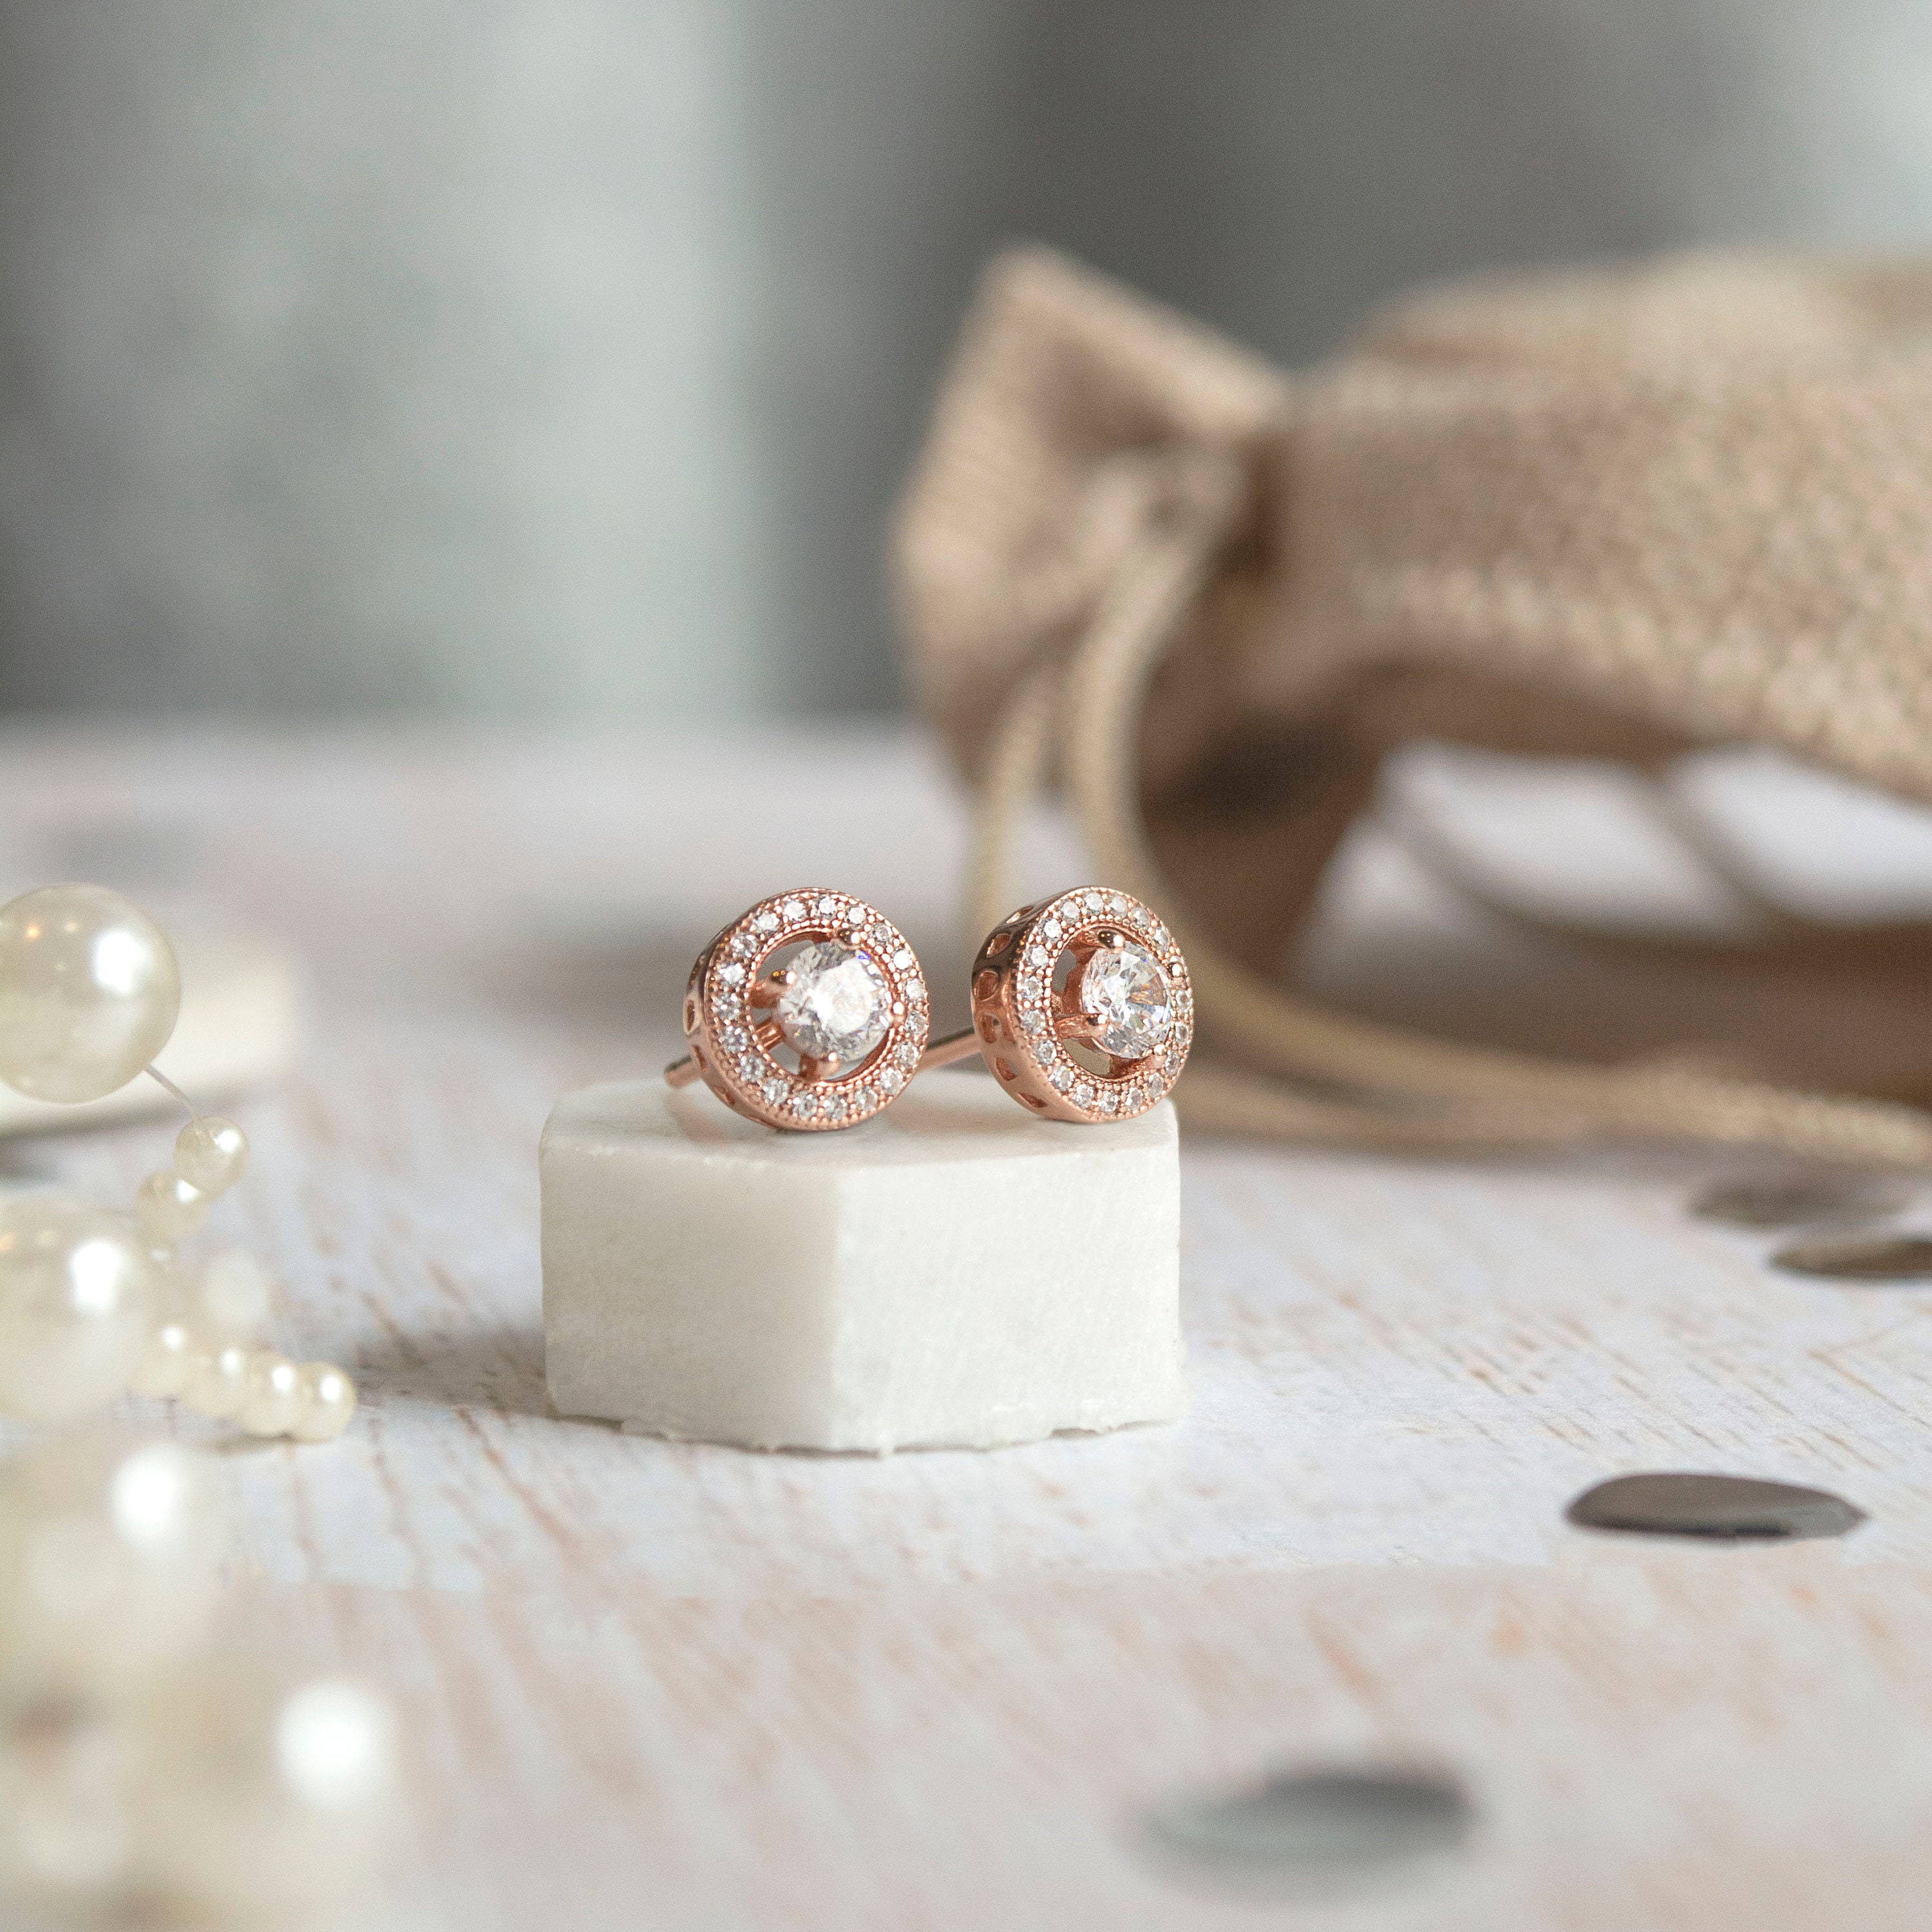 Tailored Earrings in Rose Gold